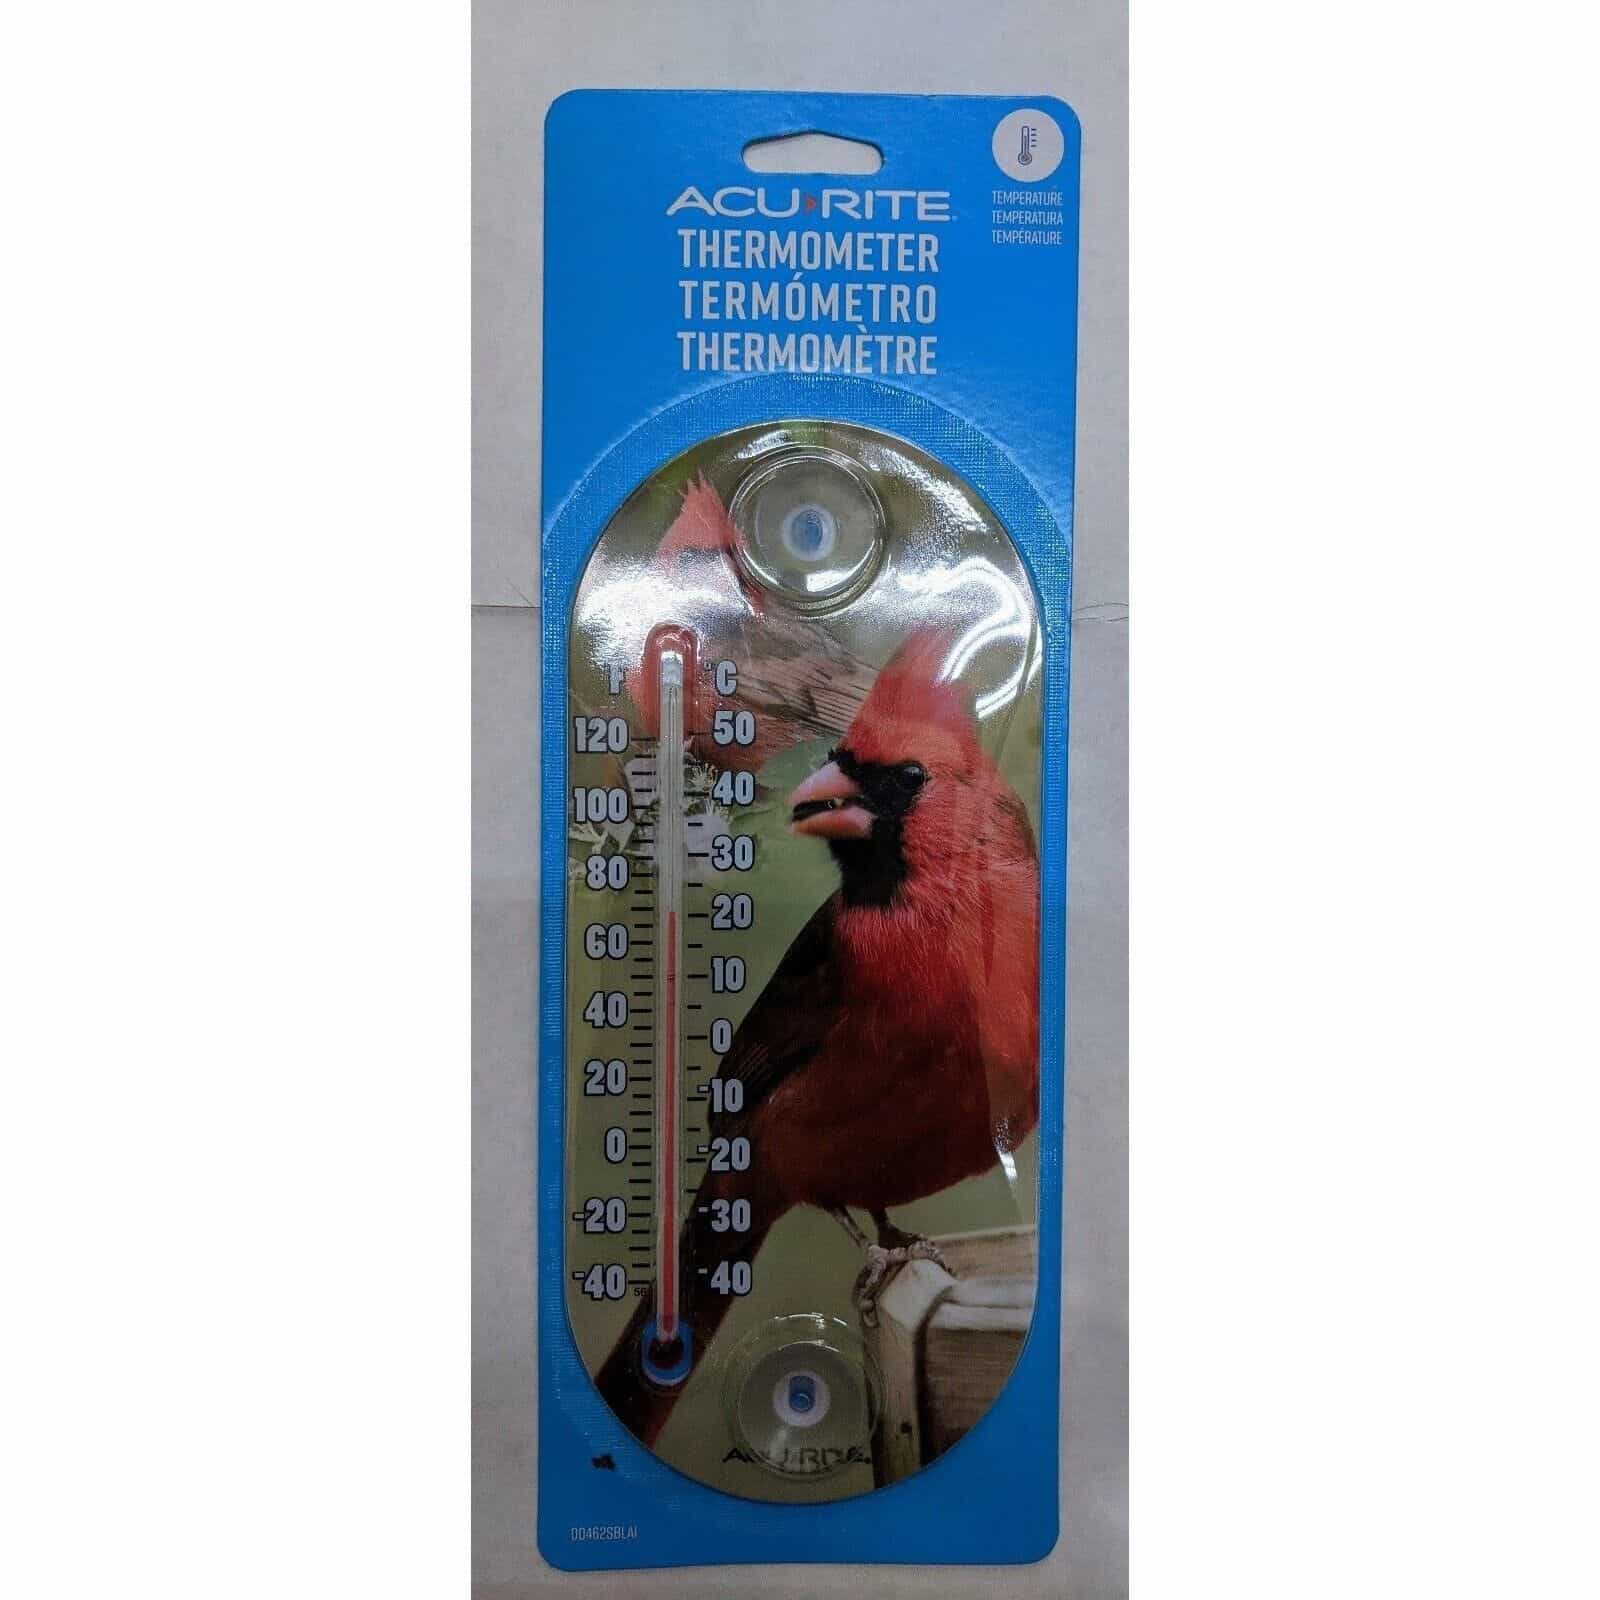 https://www.prairiegrit.com/wp-content/uploads/2023/06/acurite-cardinal-thermometer-with-suction-cups.jpg